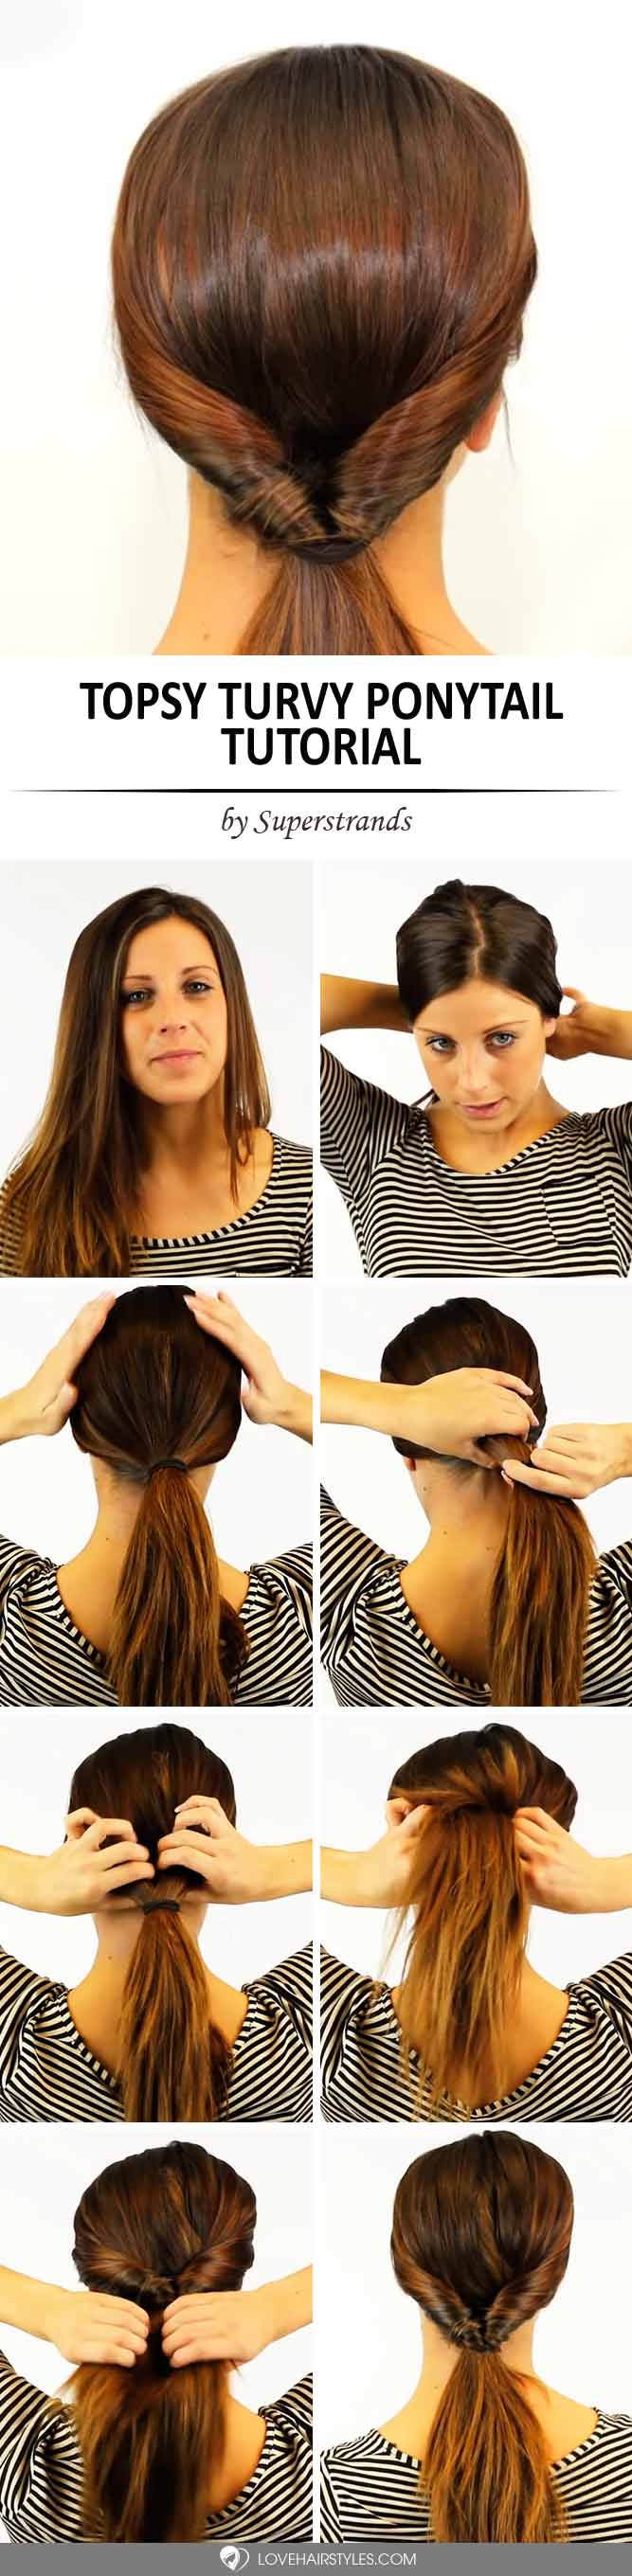 How to Do a Topsy Turvy Ponytail